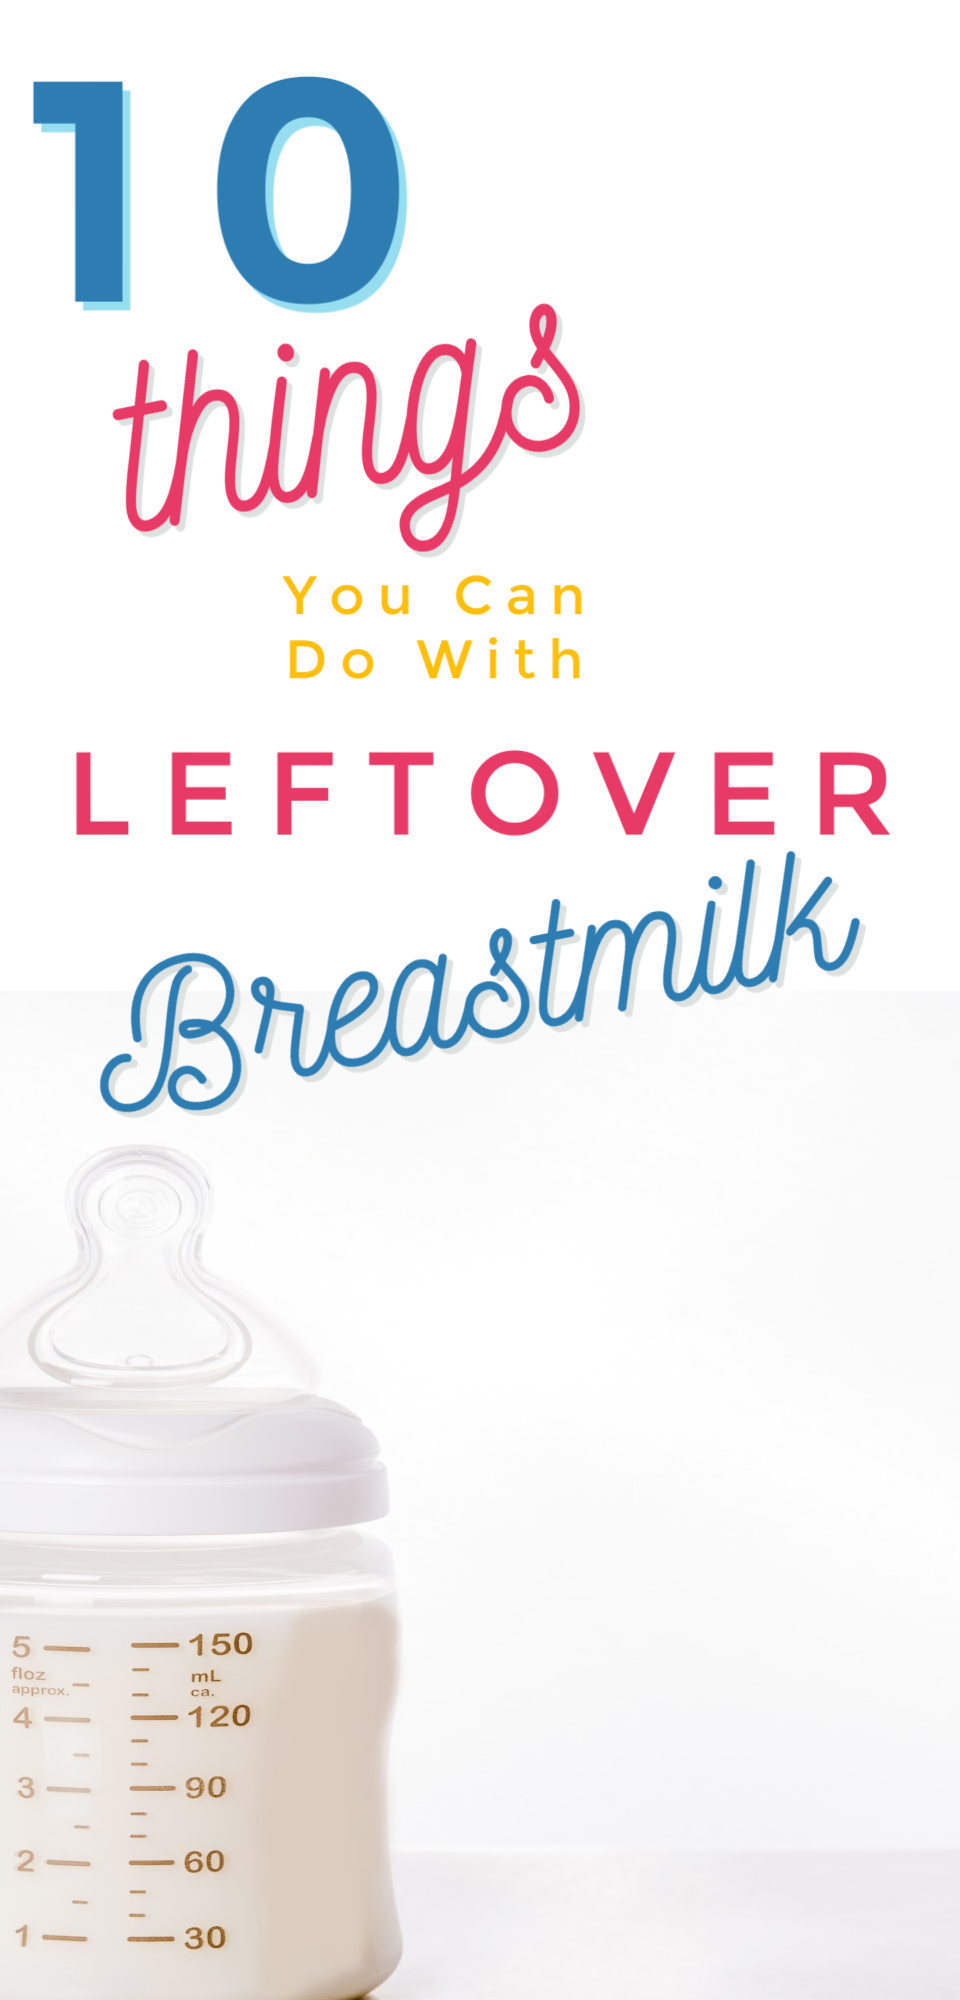 What Should You Do With Extra Breast Milk?